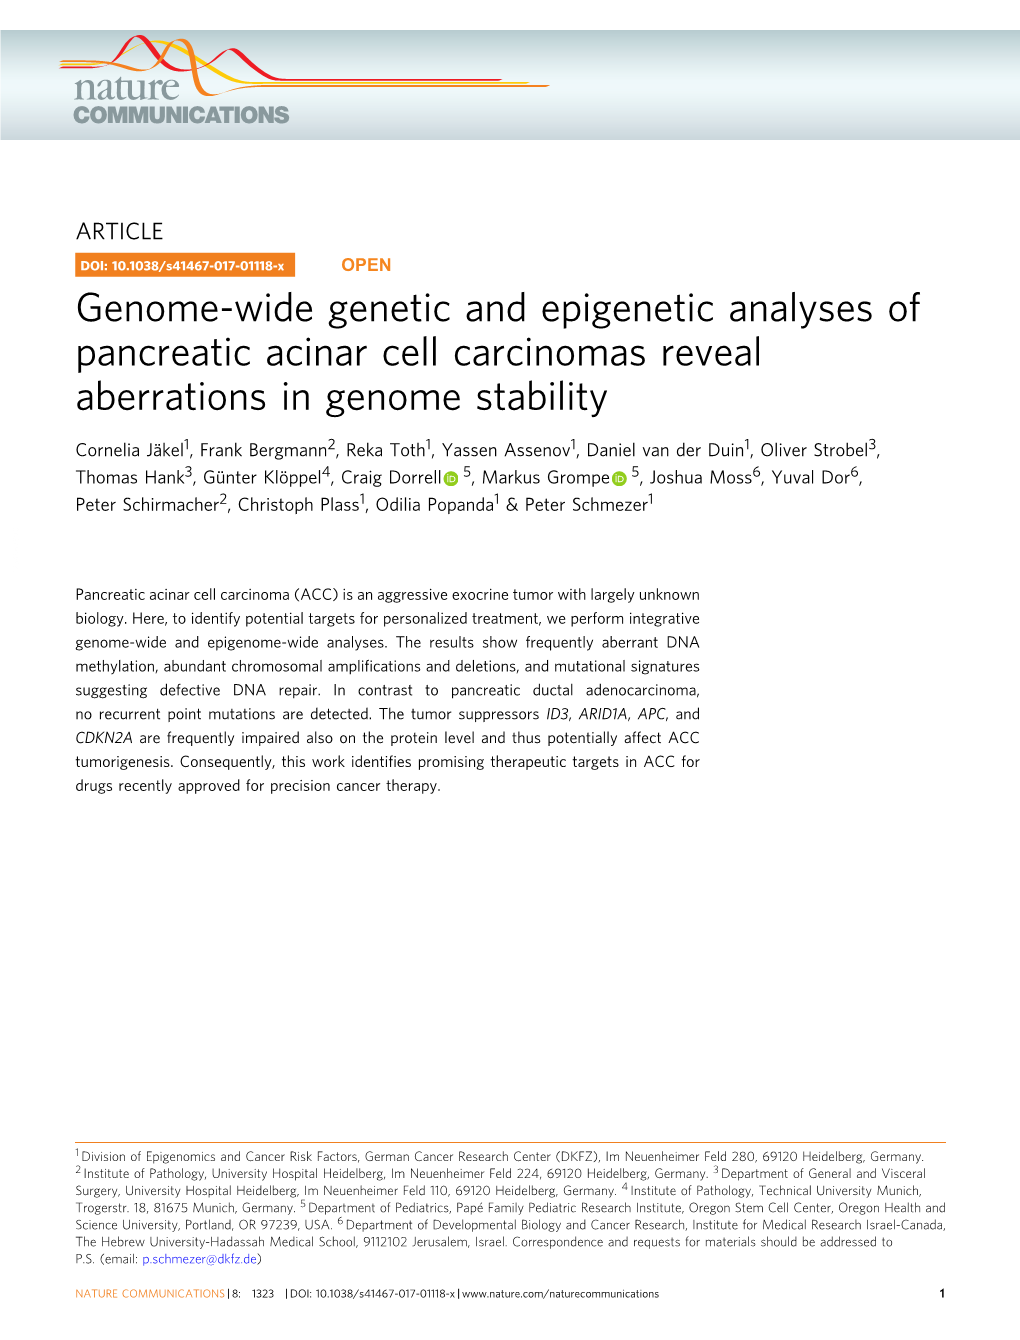 Genome-Wide Genetic and Epigenetic Analyses of Pancreatic Acinar Cell Carcinomas Reveal Aberrations in Genome Stability